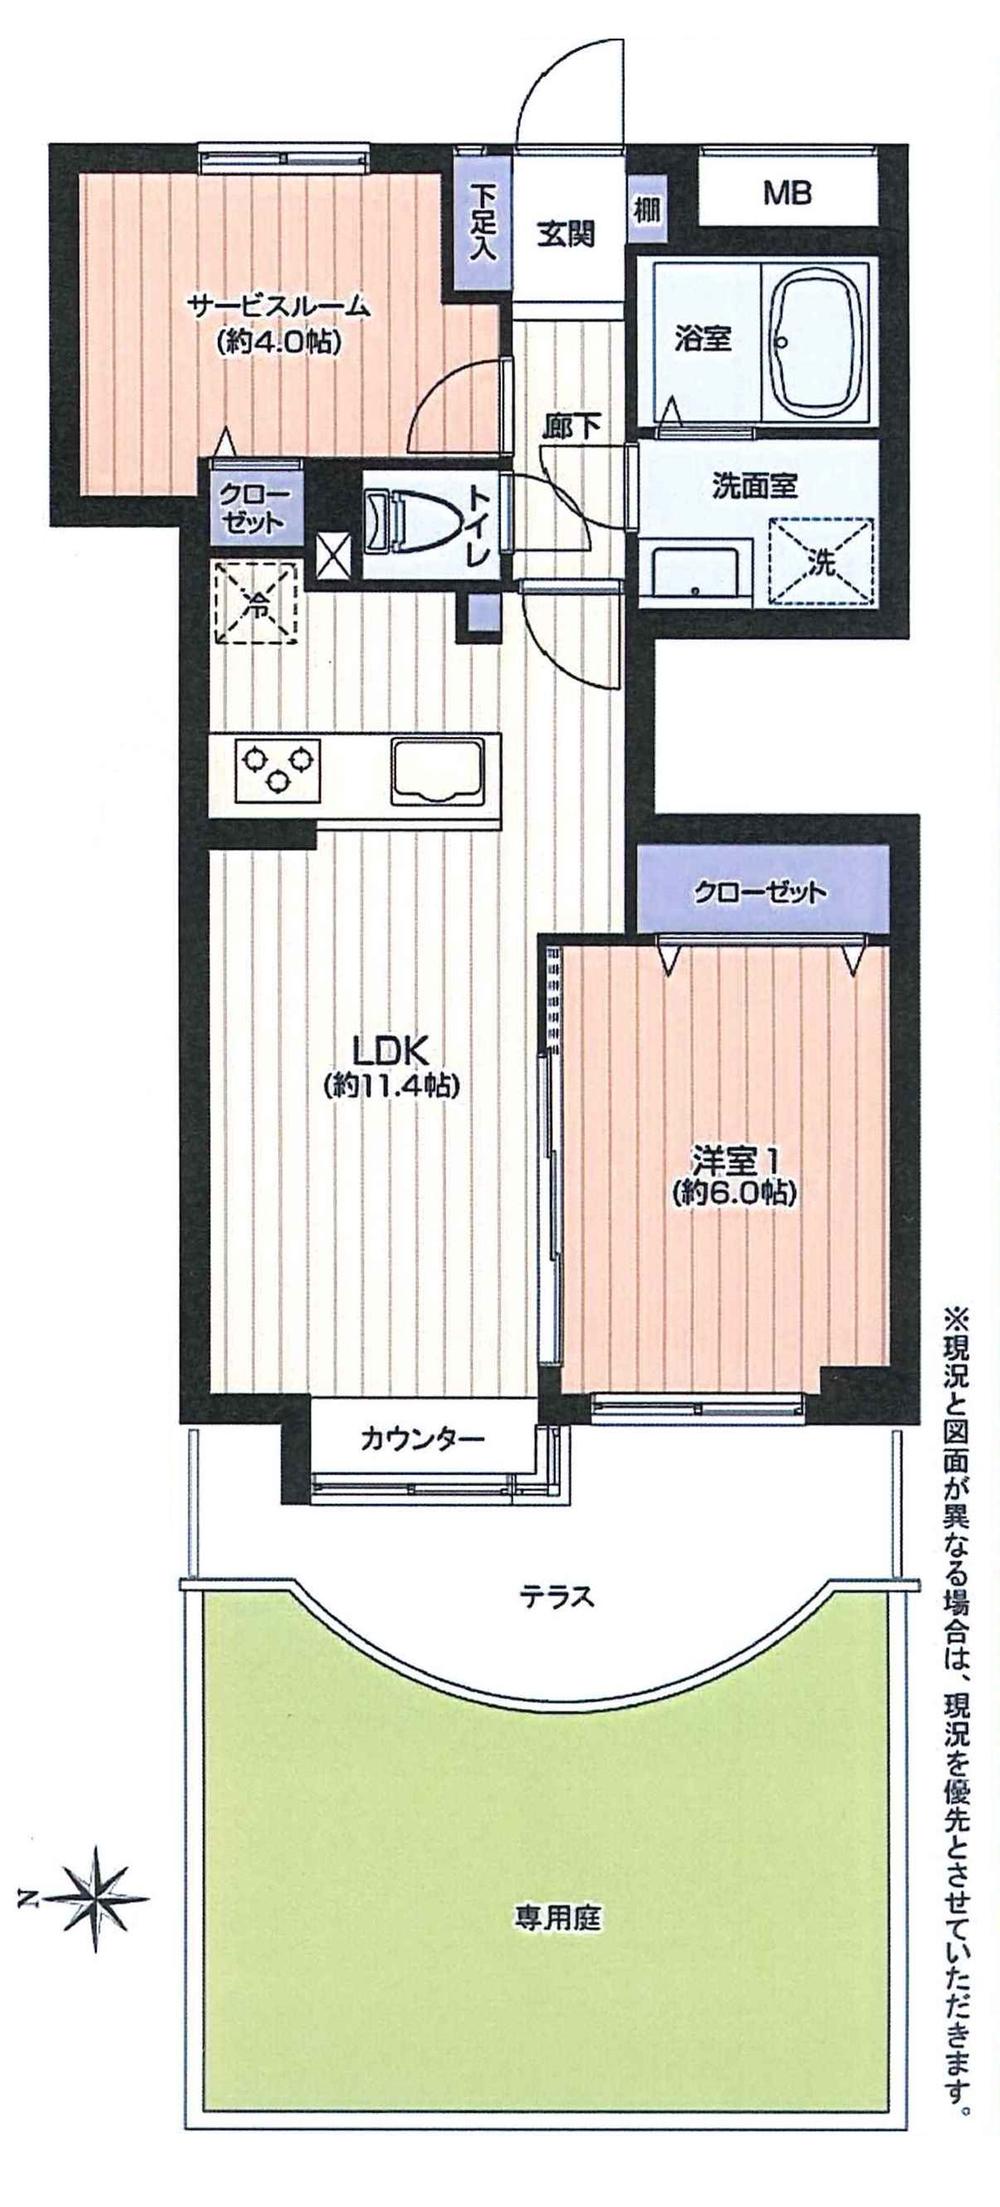 Floor plan. 2LDK, Price 10.9 million yen, There is a proprietary area 47.09 sq m private garden is a bright room